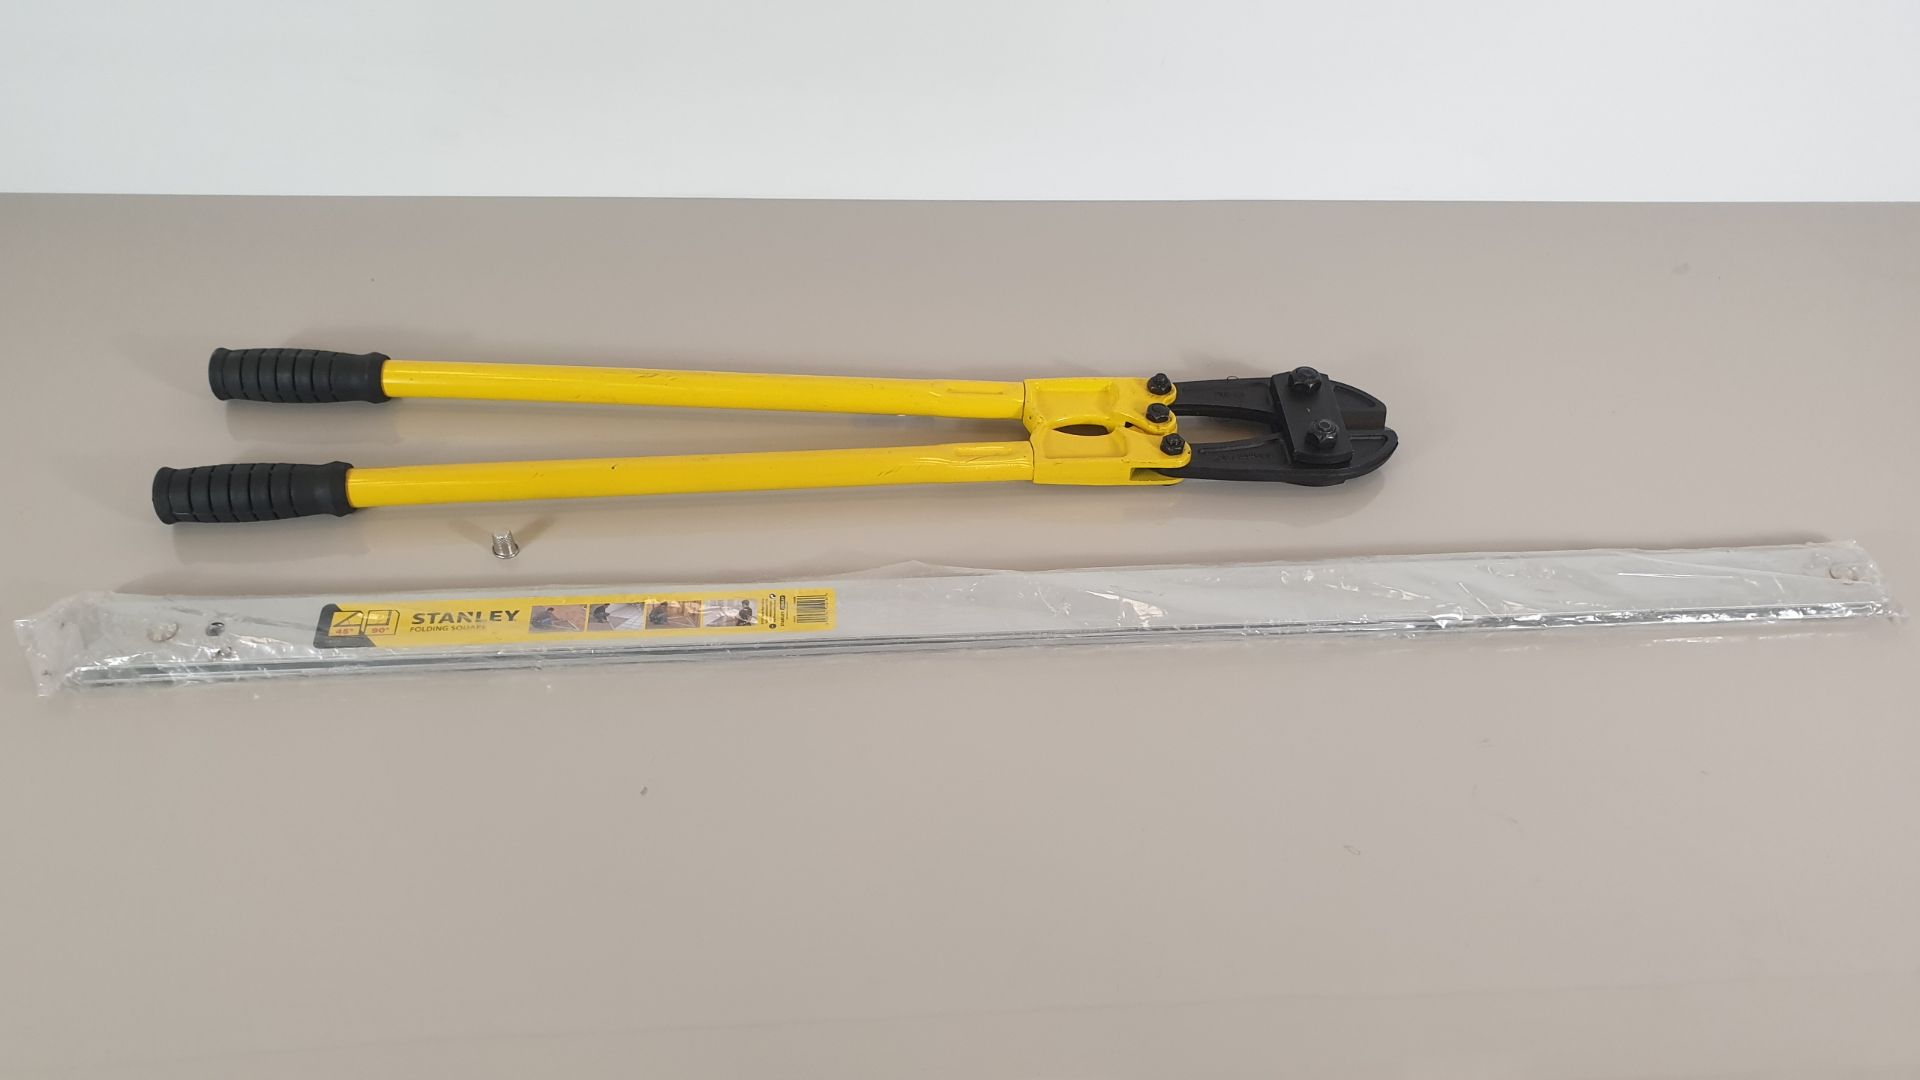 (LOT FOR THURSDAY 28TH MAY AUCTION) BRAND NEW STANLEY 900MM / 36" BOLT CUTTER PLUS A LARGE STANLEY